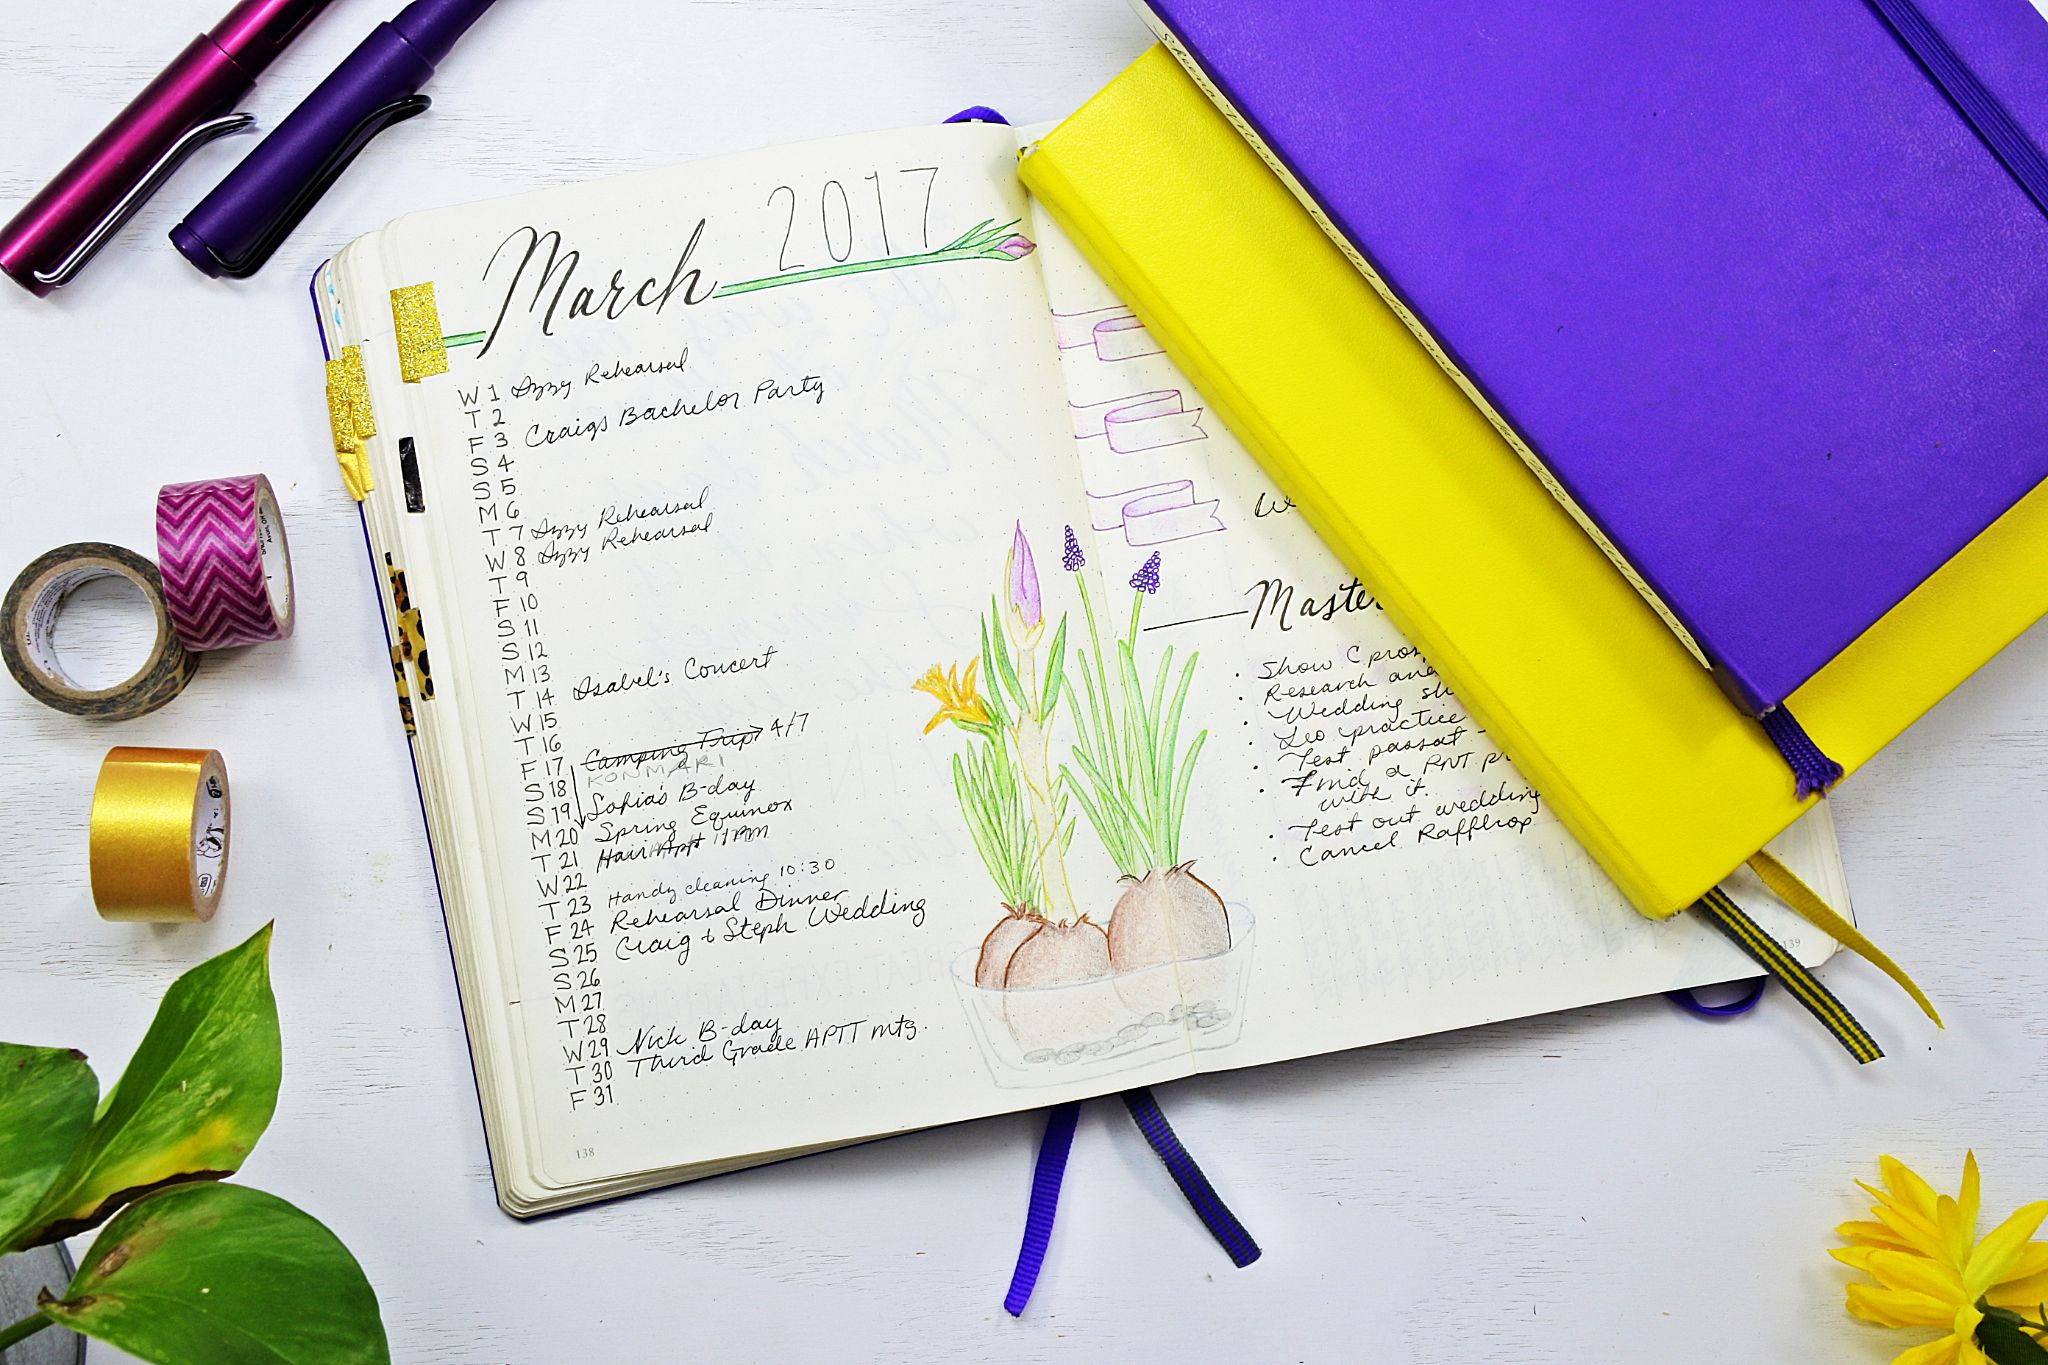 Bullet Journal Monthly Spreads - The Ultimate Guide to Rock Your Month!